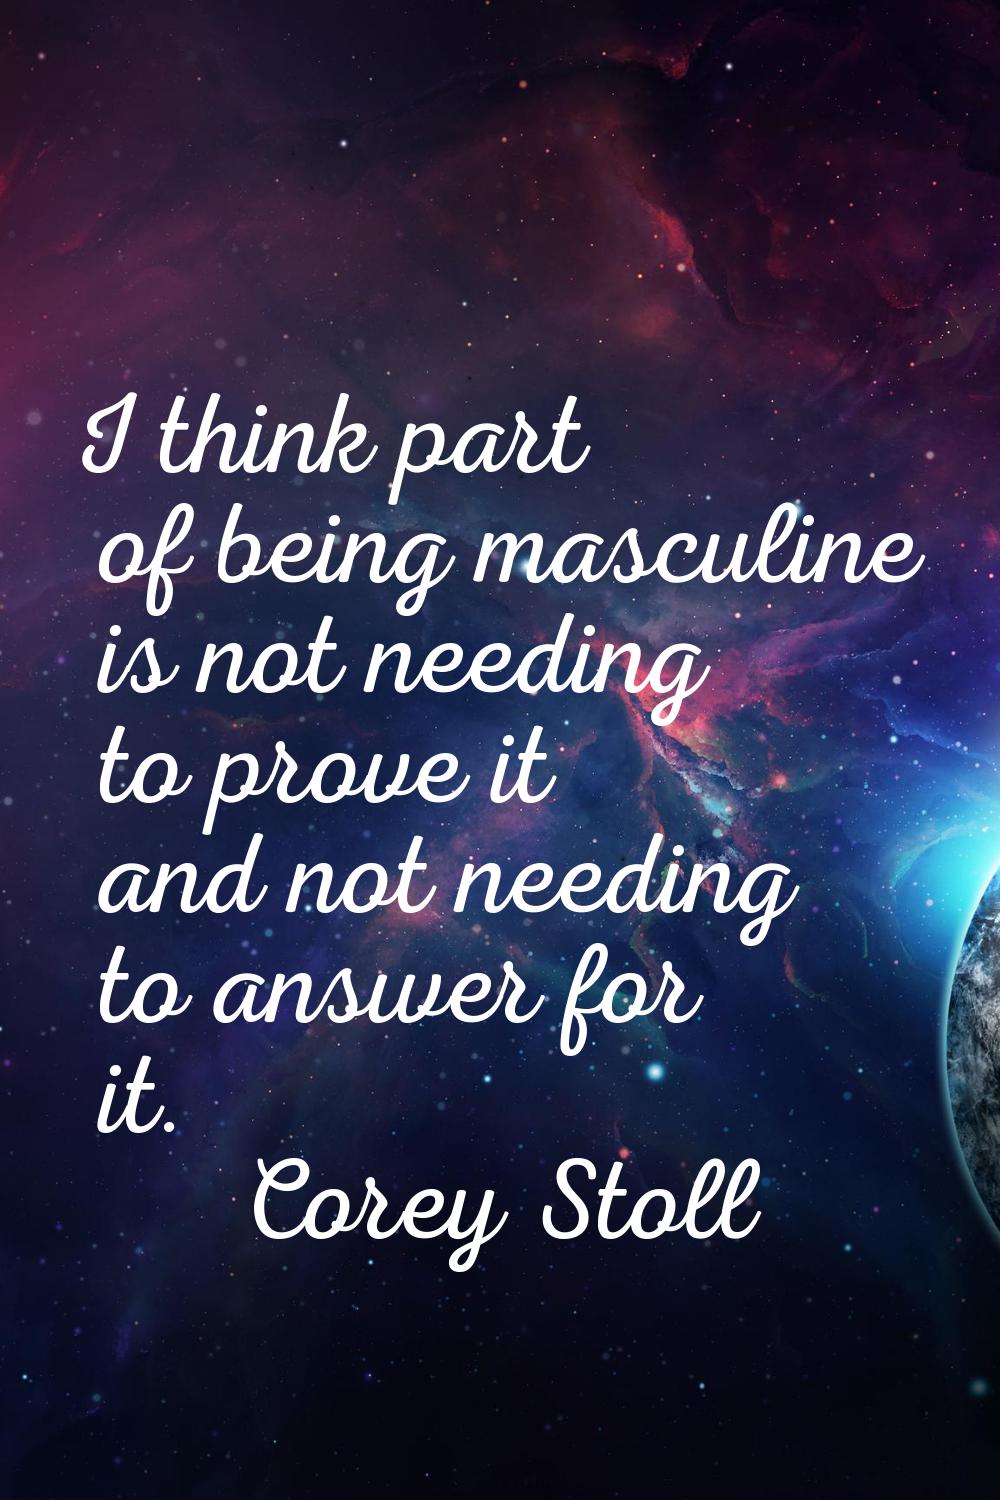 I think part of being masculine is not needing to prove it and not needing to answer for it.